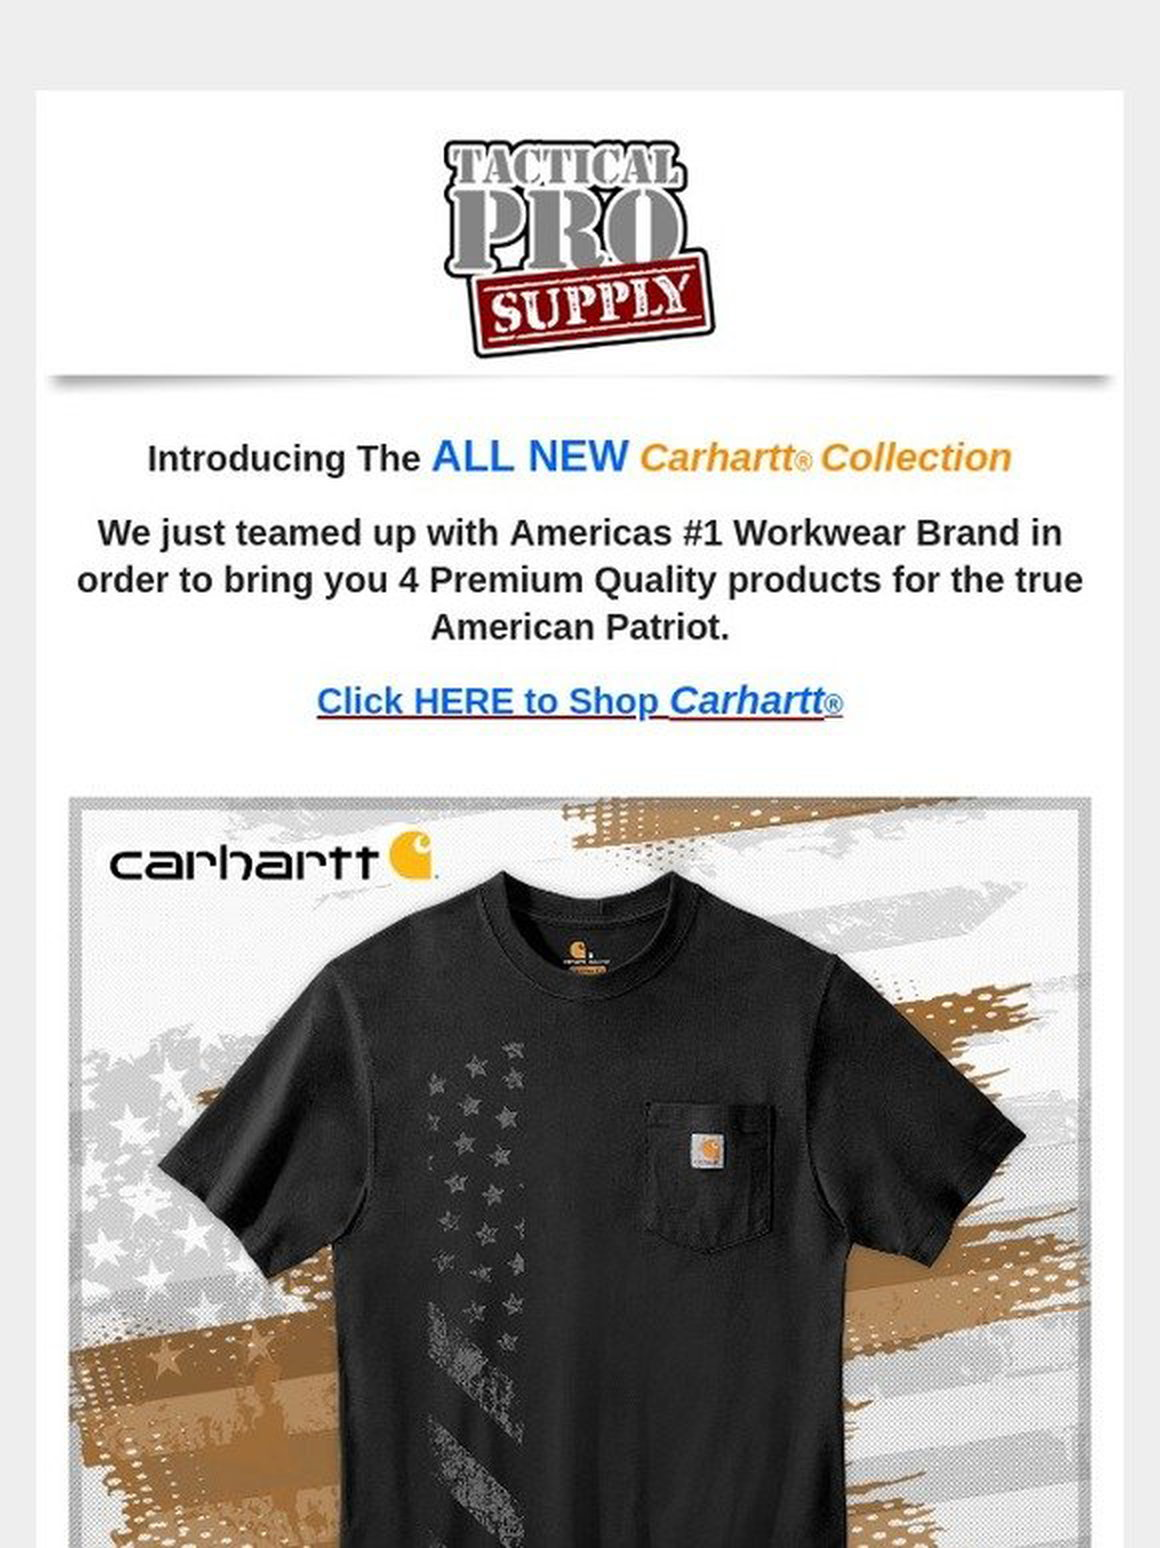 Tactical Pro Supply: All NEW Carhartt® Collection 🗽 | Milled